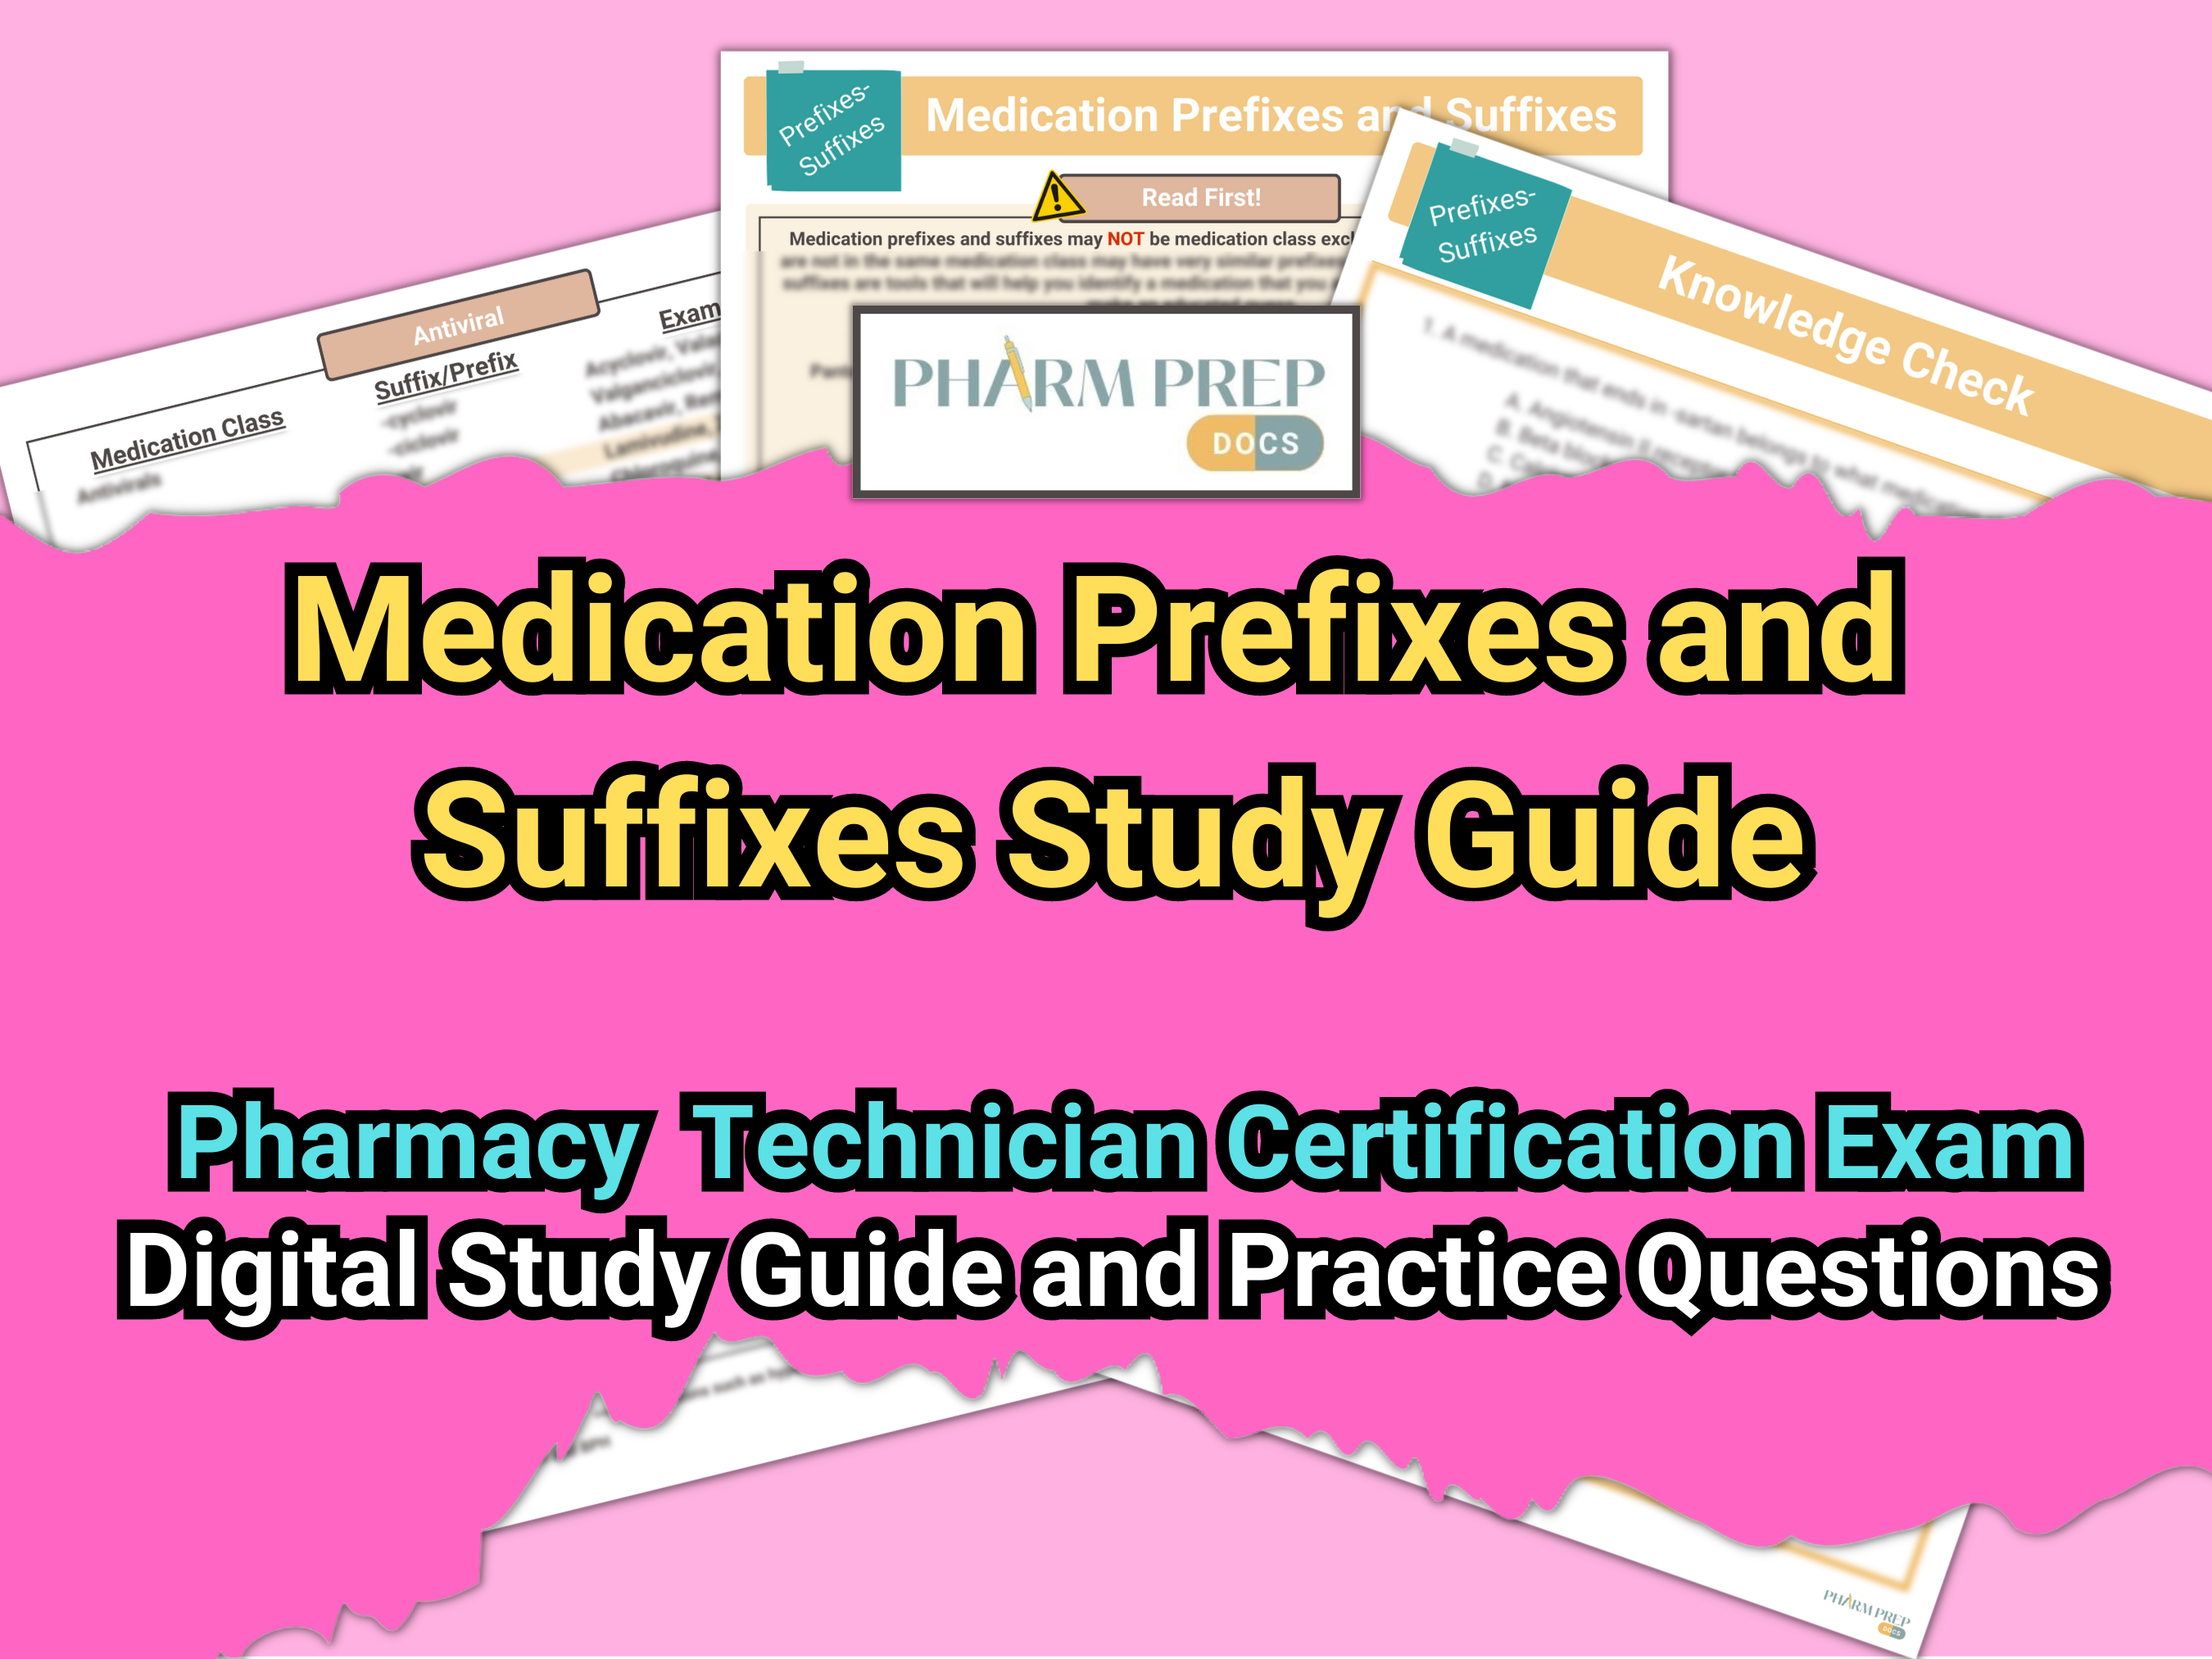 Medication Prefixes and Suffixes Pharmacy Technician Certification Exam Study Guide